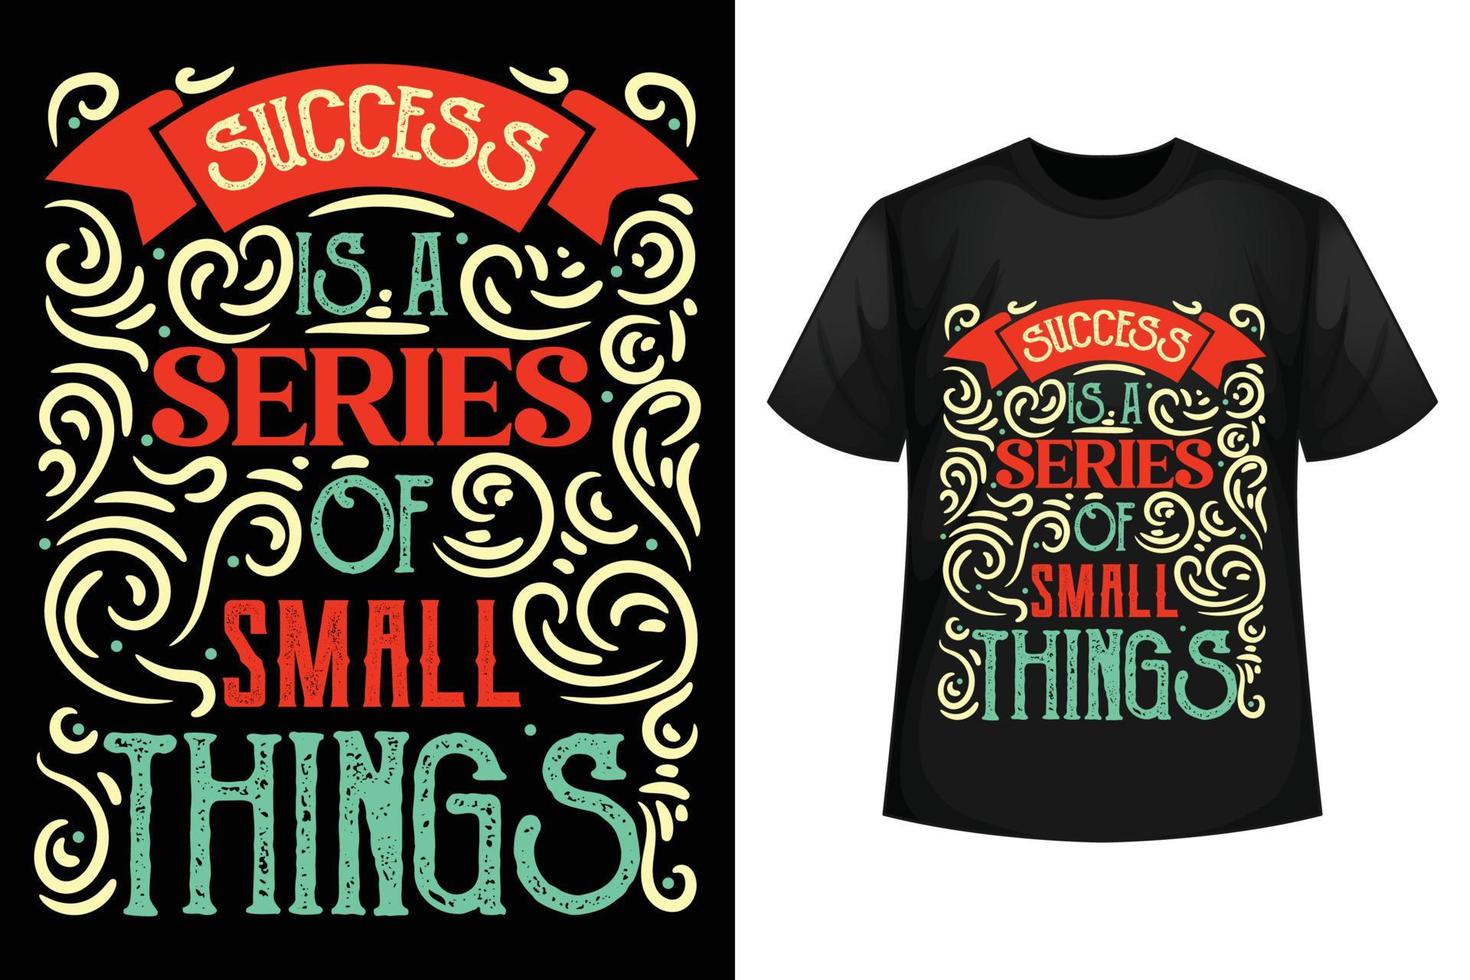 Success is a series of small things - Motivational typography t-shirt design template vector